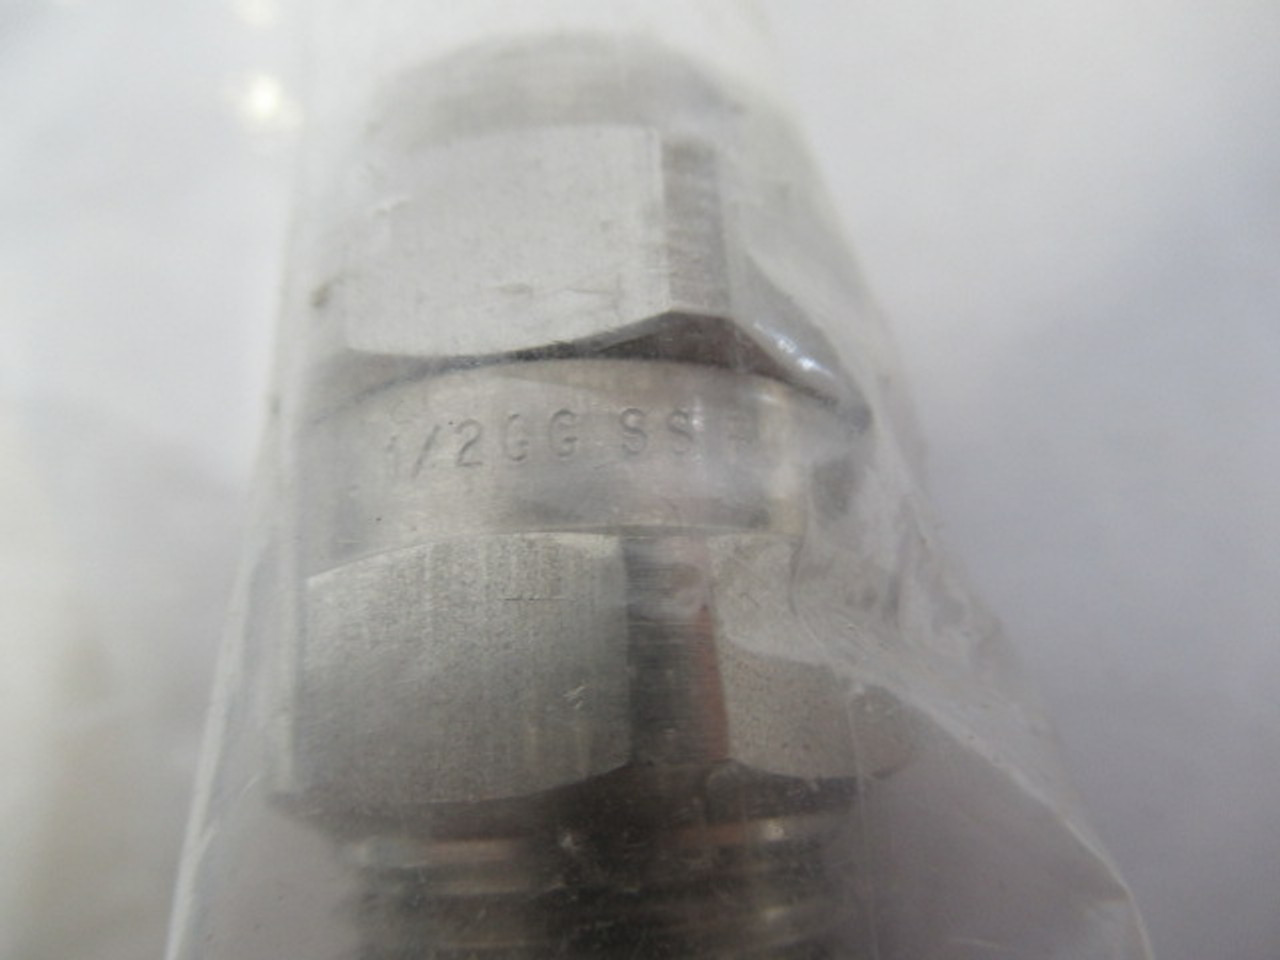 Spraying System 1/2GG-16SS SS Full Jet Cone Spray Nozzle Tip 1/2" ! NWB !